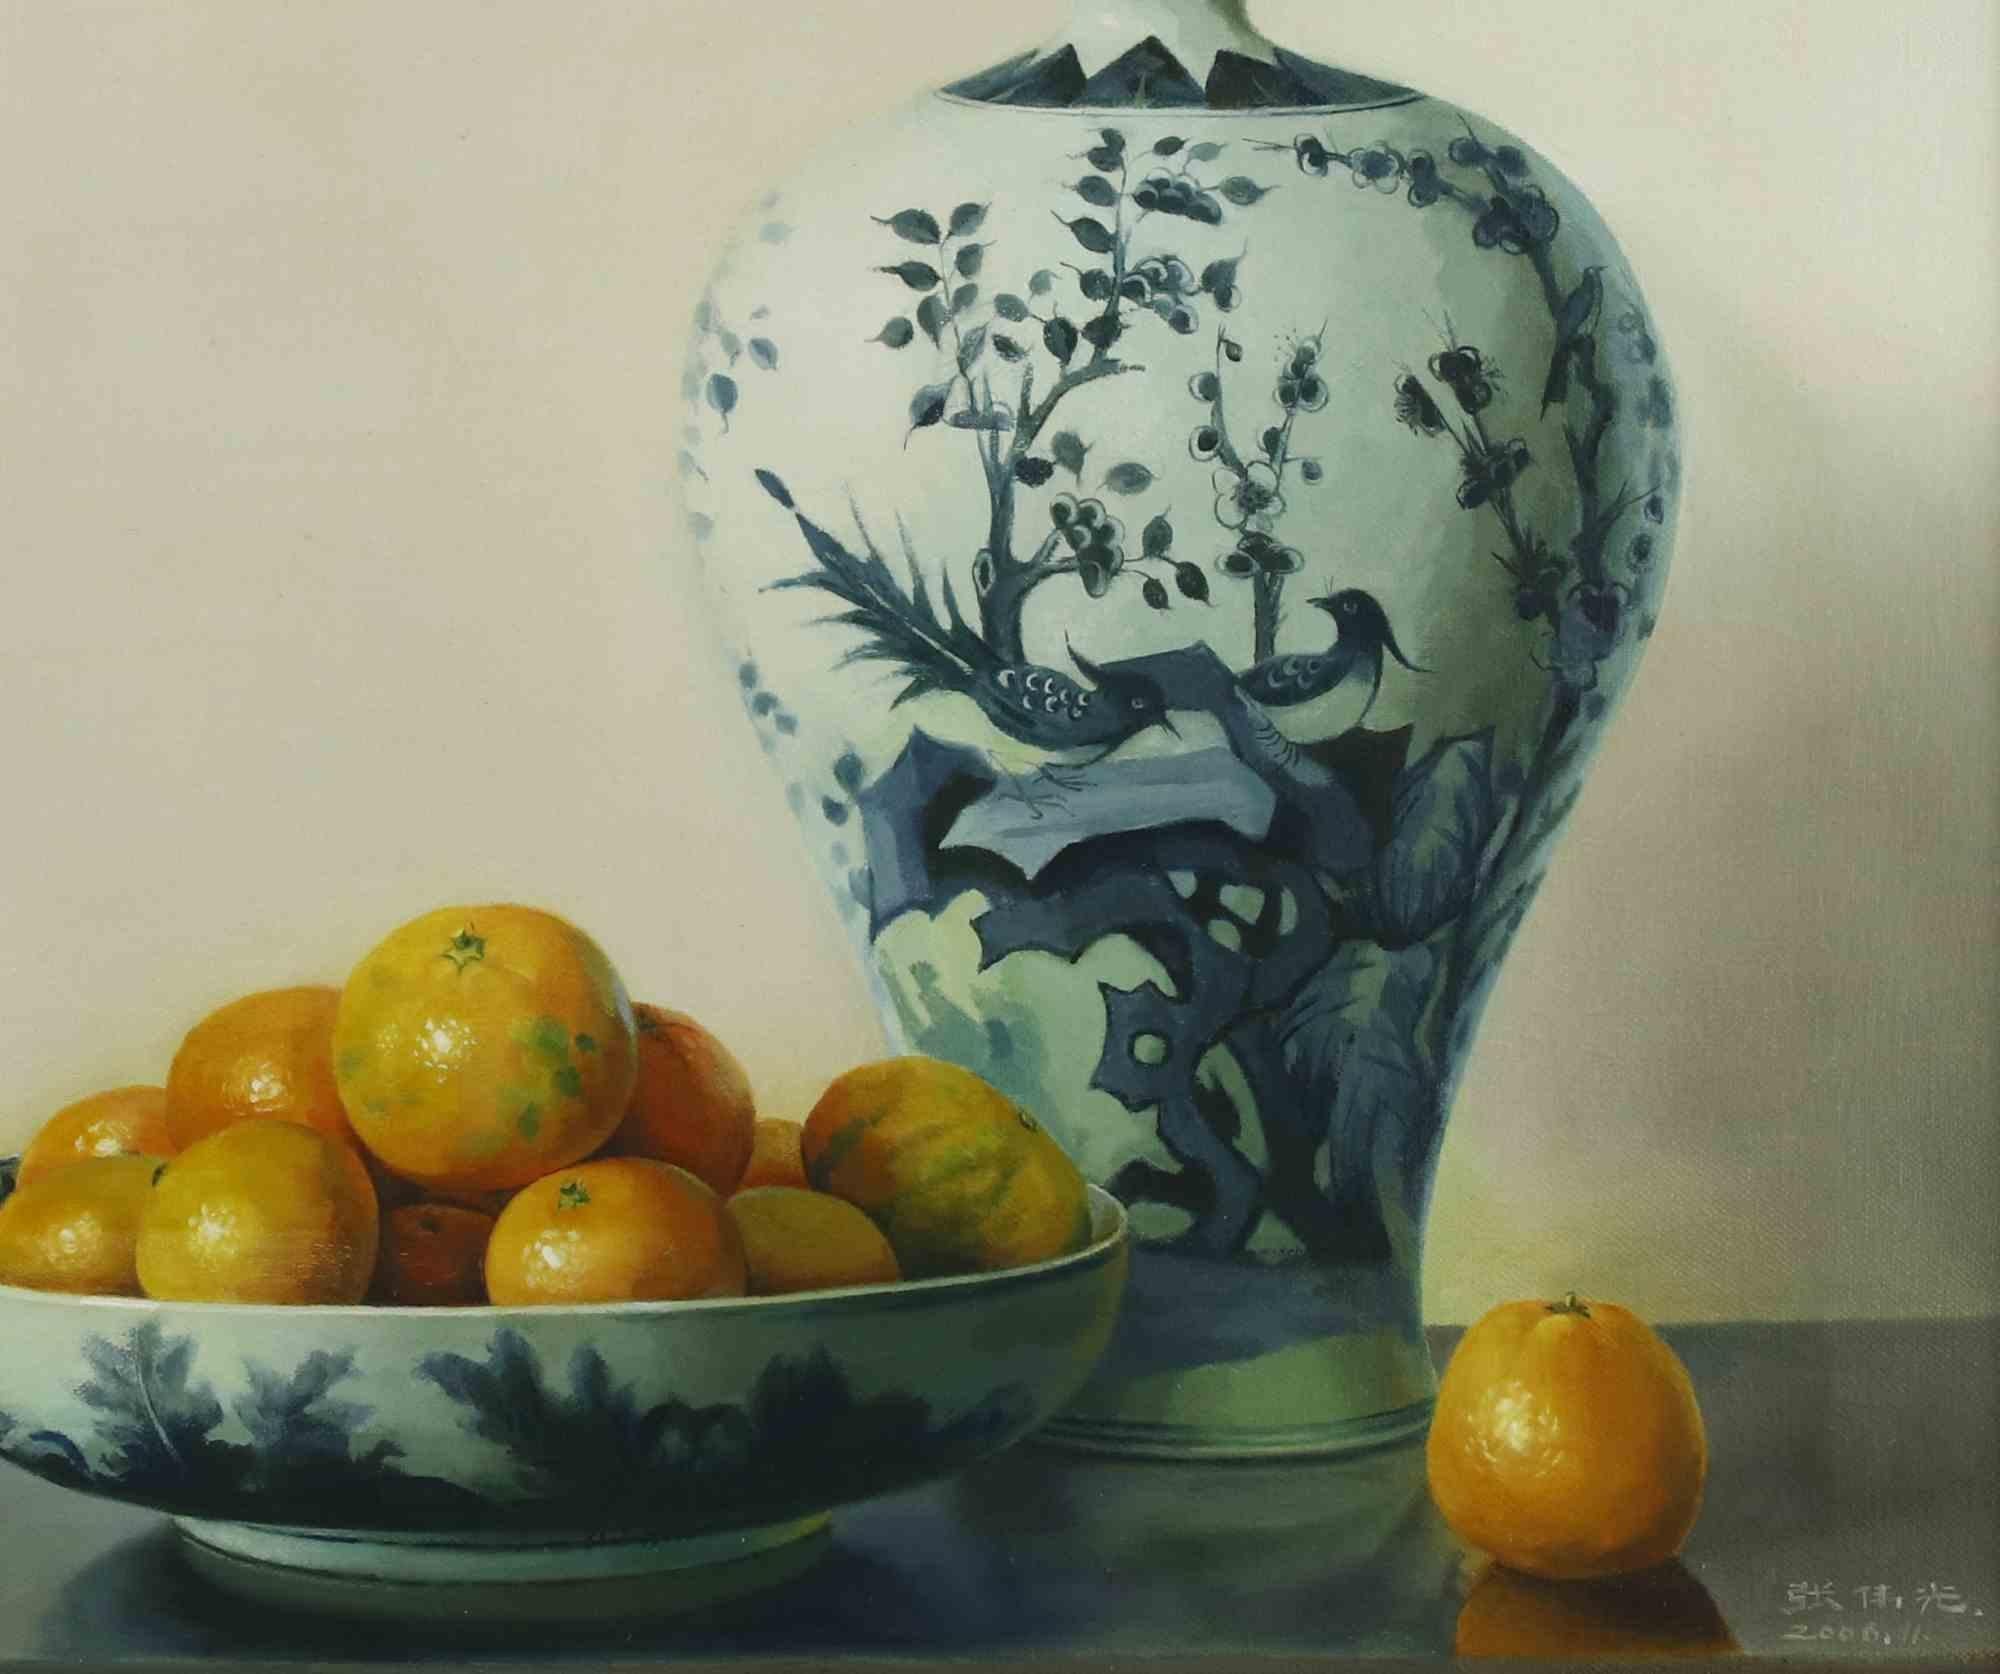 Oranges With Vase  is an original oil painting realized in 2006 by Zhang Wei Guang (Mirror).

Beautiful oil painting on canvas. 

Includes frame:  83 X 6 X 70  cm

Hand-signed and dated on the lower right corner.

Zhang Wei Guang , also called